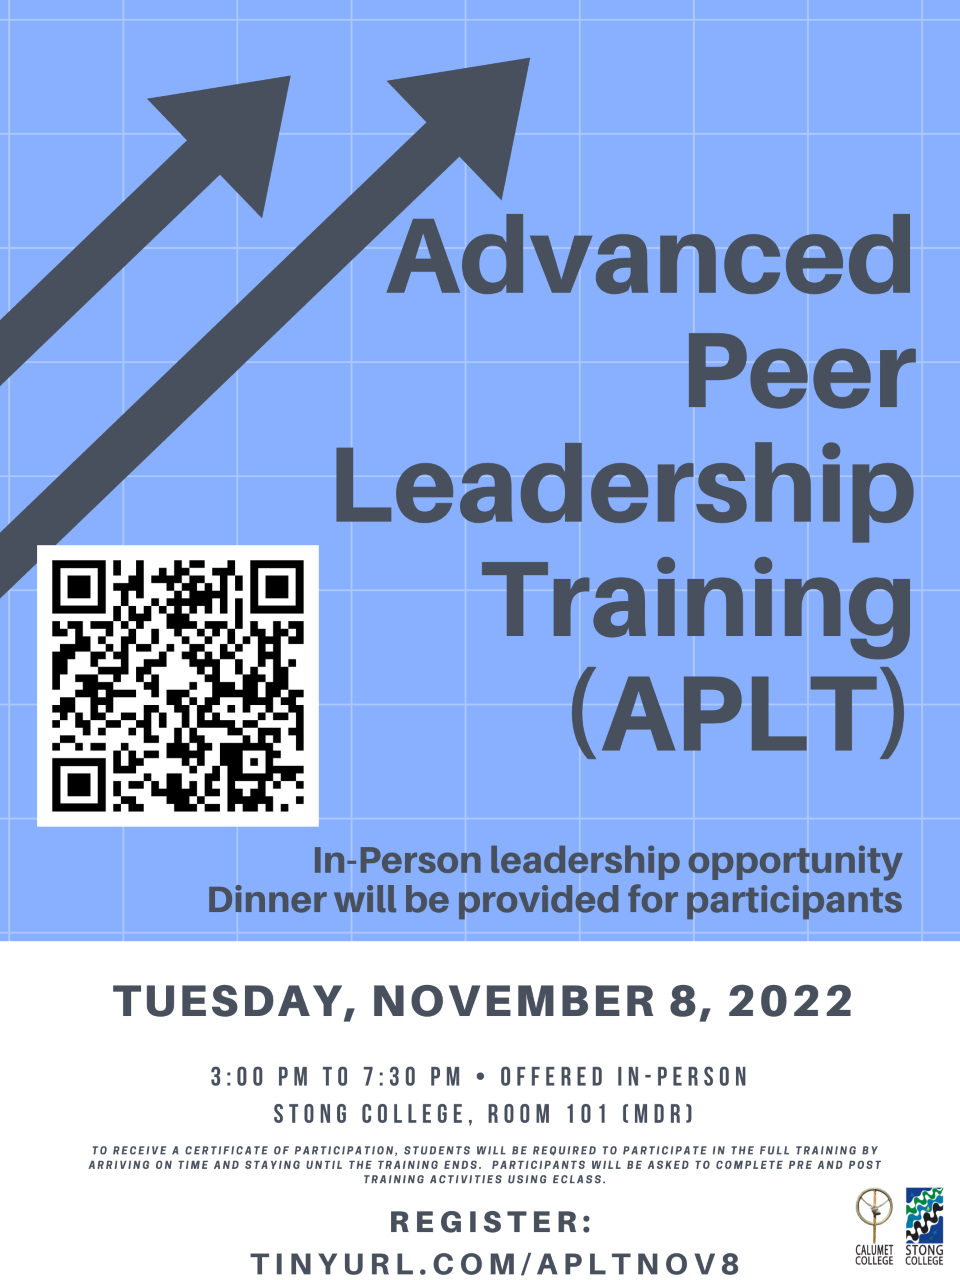 ADVANCED PEER LEADERSHIP TRAINING (APLT)  Tuesday, November 8, 2022 from 3PM - 7:30PM     Date: Tuesday, November 8, 2022  Time: 3:00 pm to 7:30 pm  (dinner will be provided for participants)  Registration Link: tinyurl.com/apltnov8 alternatively Advanced Peer Leadership Training (APLT) - Tuesday, November 8, 2022 (yorku.ca)  Mode of Delivery: the training is delivered in-person  Location: Stong College, Room 101 (MDR)  Learn More: https://www.yorku.ca/colleges/ccsc/leadership-exploration-and-development/      The theme of the training is Leading with Purpose! Some of the topics we will explore include: Sense of Purpose & Sustainable Leadership Creating a Vision and Mission and Living Your Values Avoiding Burnout Notes:    This training is open to all Faculty of Health students and students affiliated with Calumet and Stong Colleges.  The completion of ELT and FPLT is NOT mandatory.   To receive a certificate of participation, students will be required to participate in the full training (3:00 pm to 7:30 pm).  Students are asked to arrive and stay for the duration of the training.